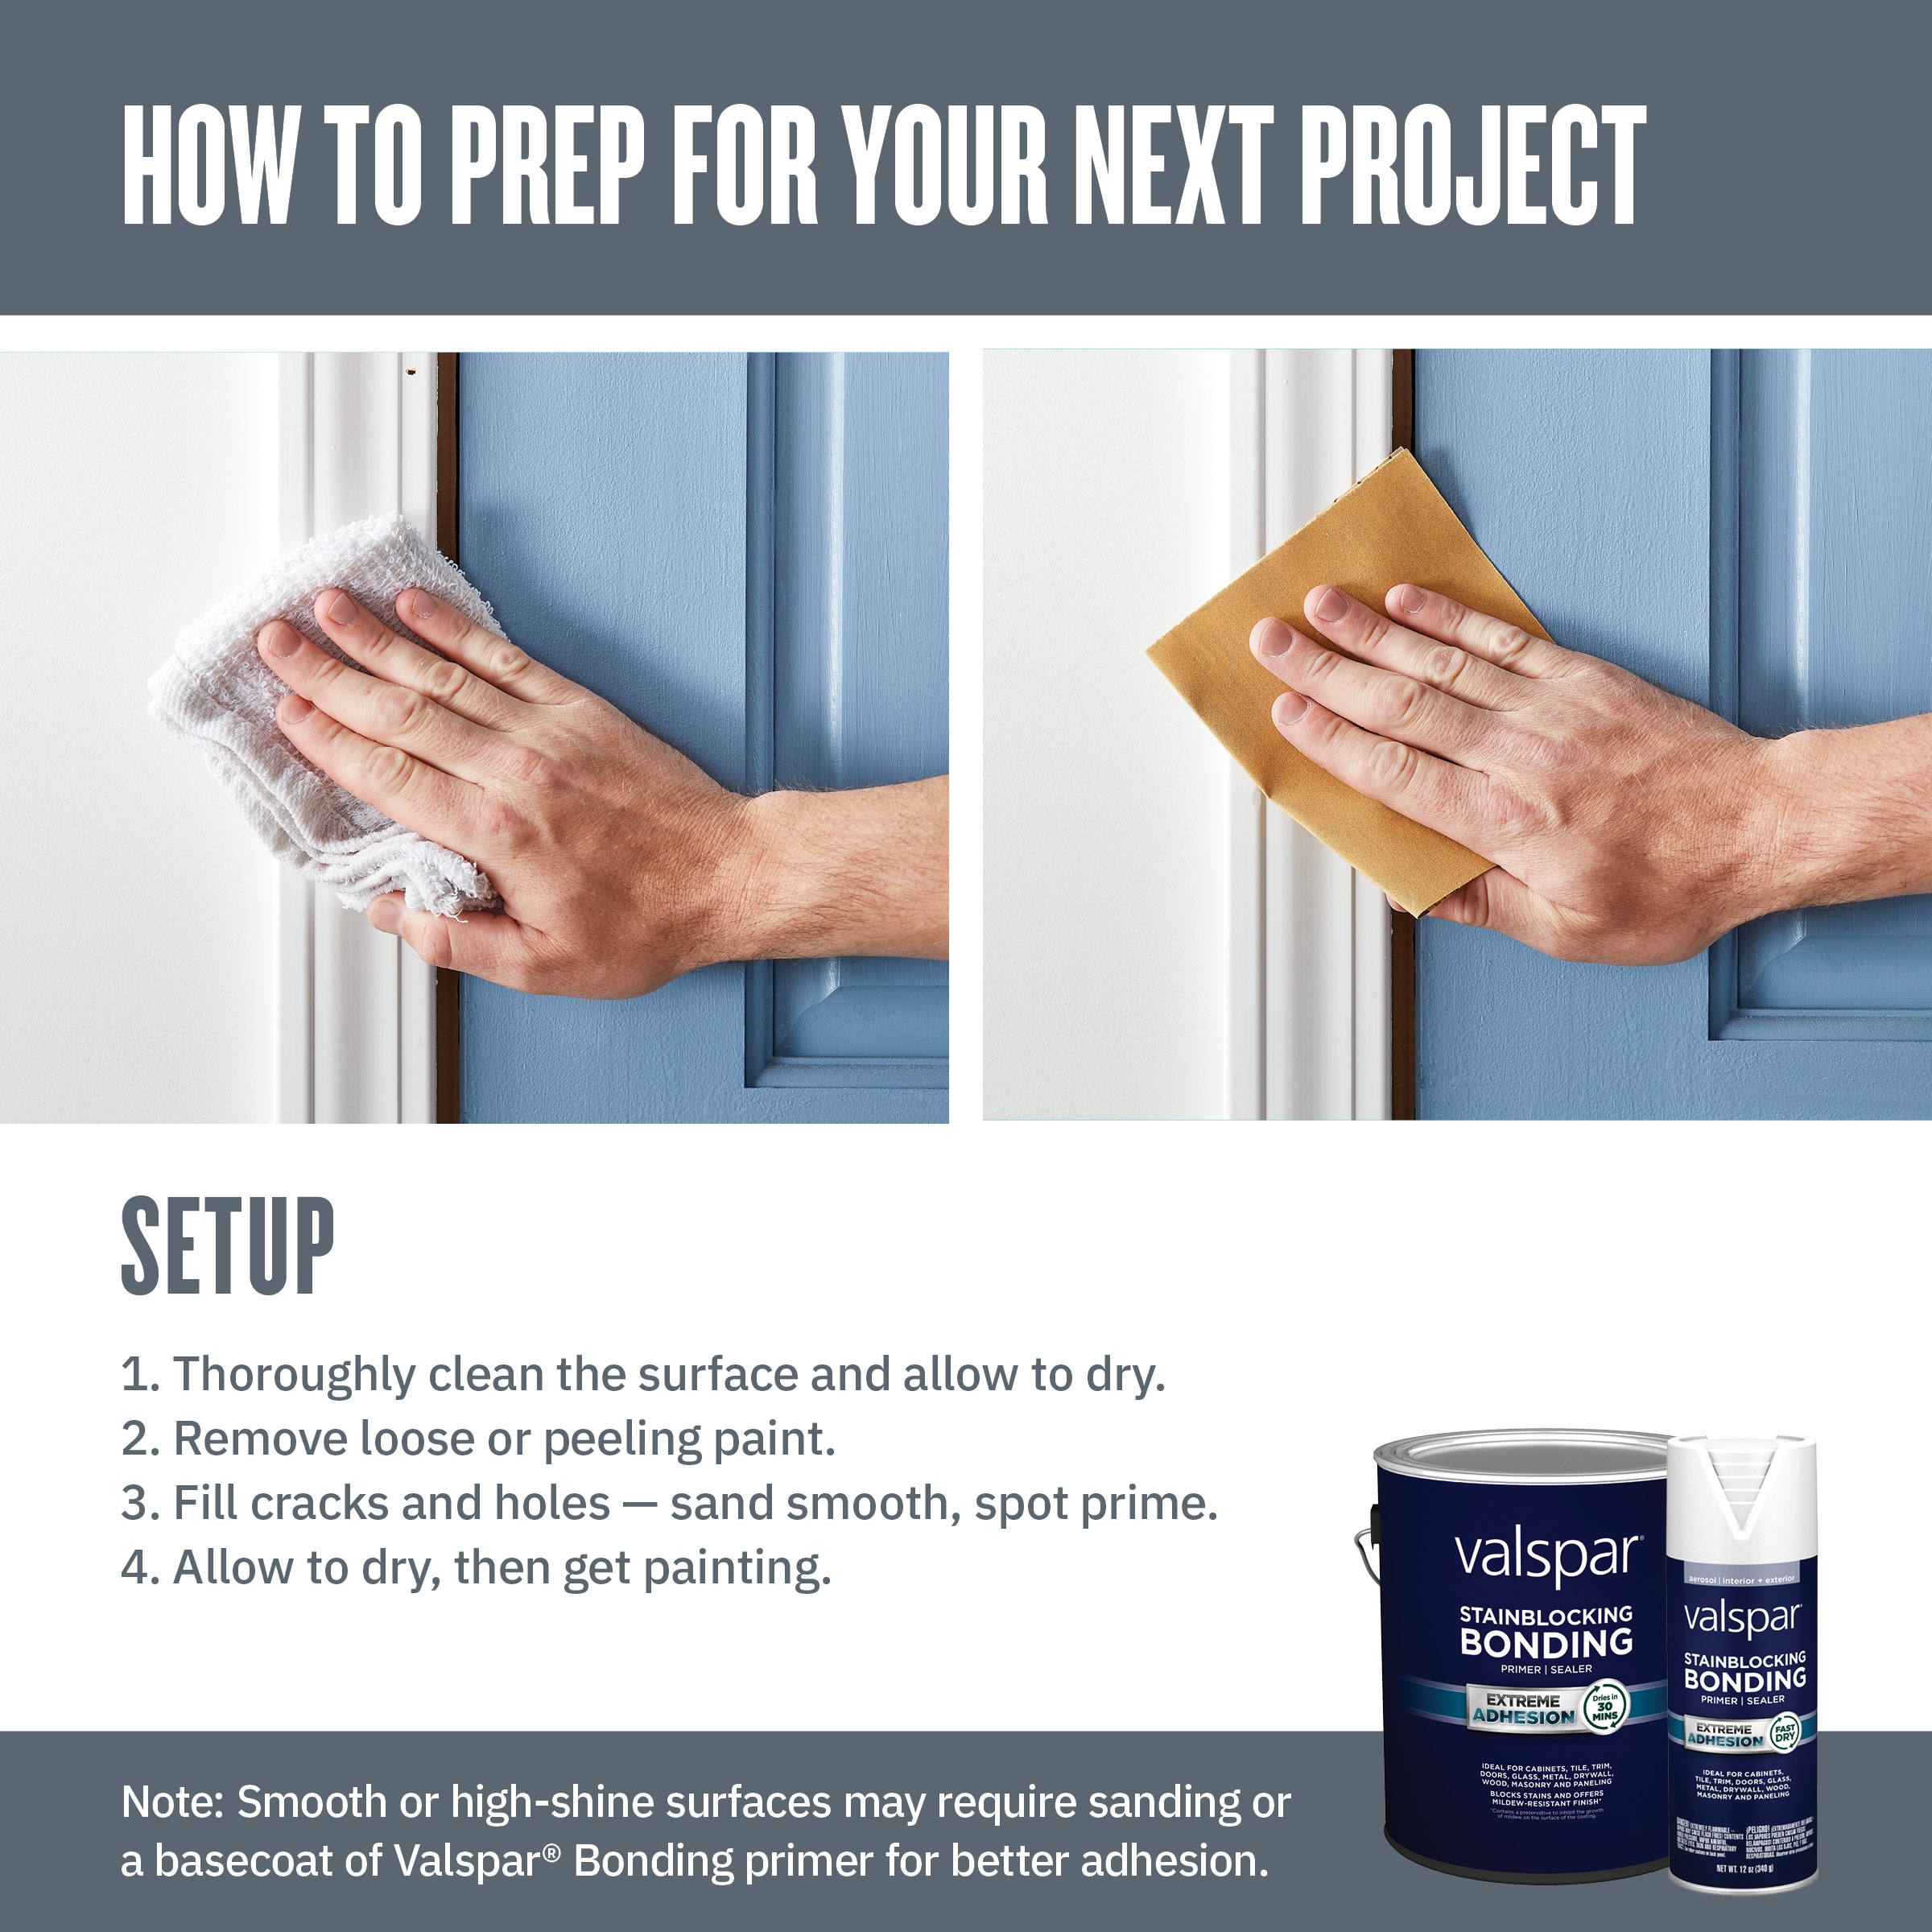 Valspar 6-Pack Gloss White Spray Paint and Primer In One (NET WT. 12-oz) at